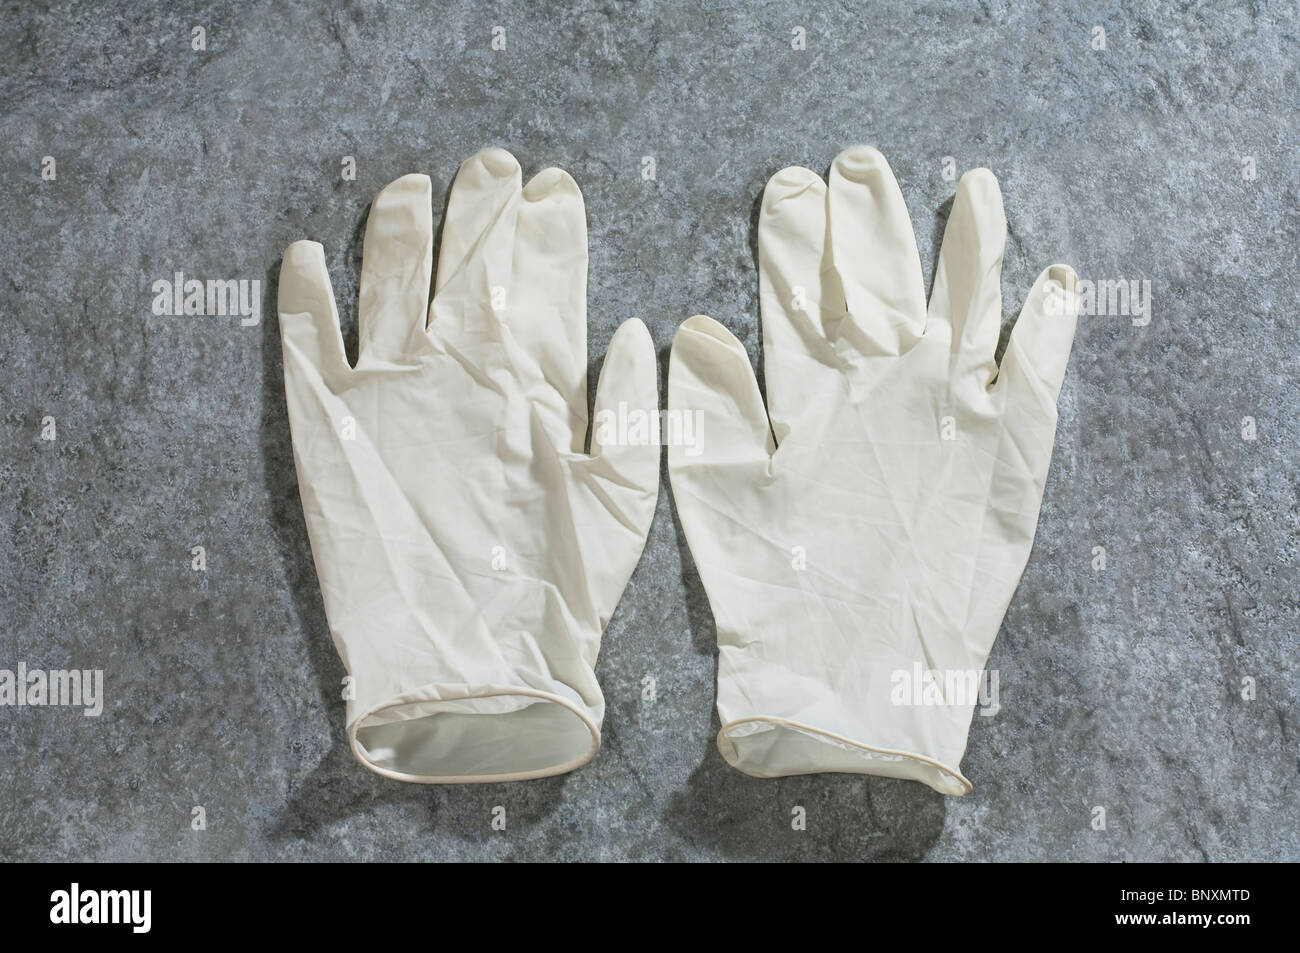 A pair of medical latex rubber gloves Stock Photo